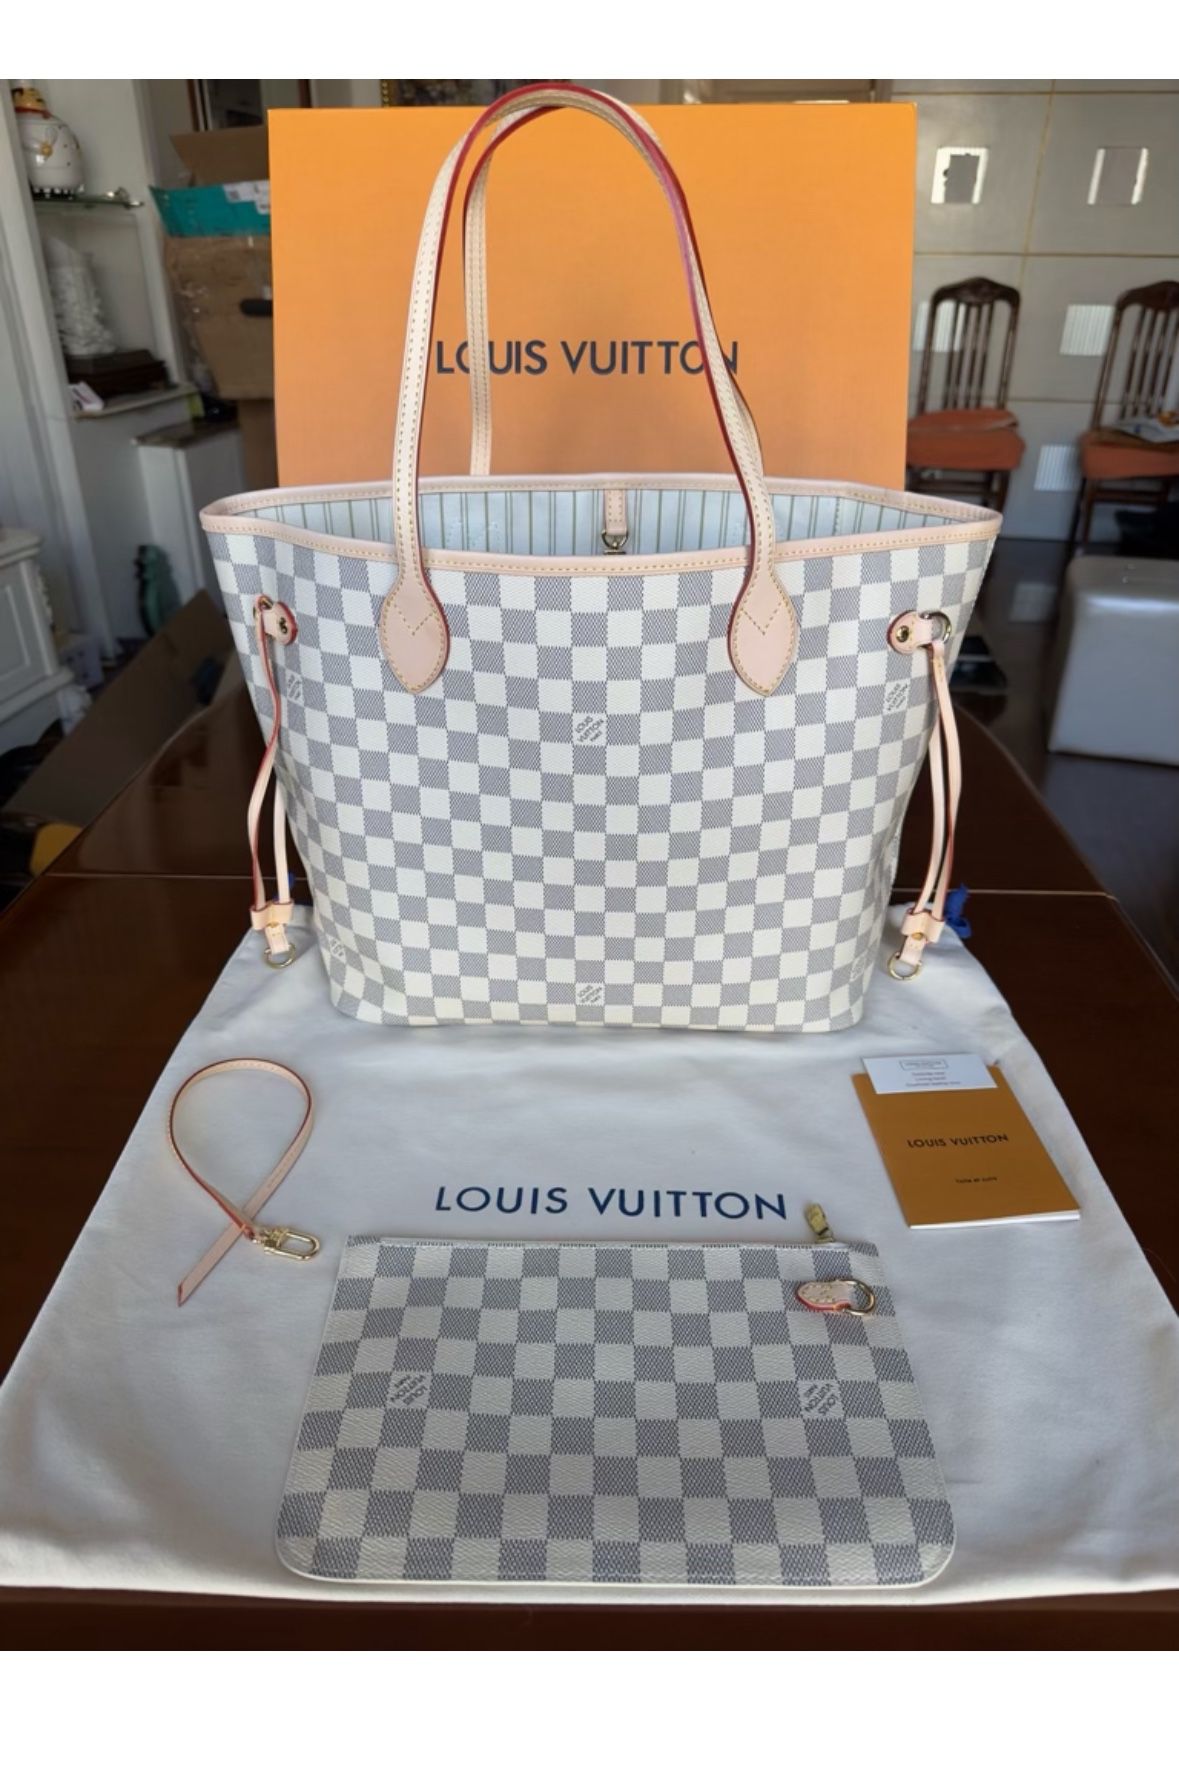 New Louis Vuitton Purse With Chip 